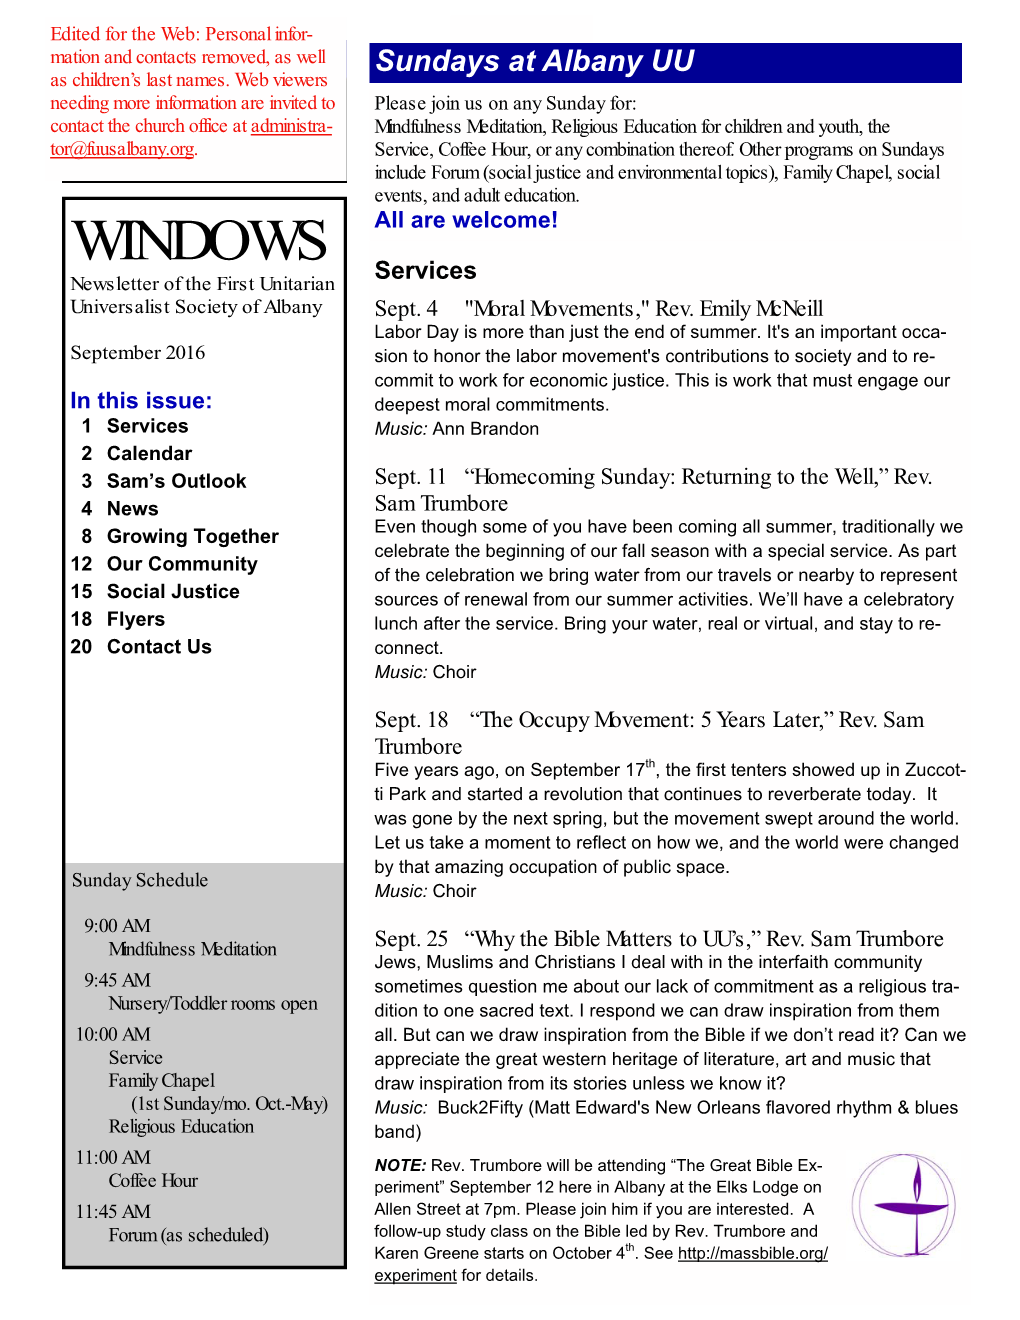 WINDOWS Services Newsletter of the First Unitarian Universalist Society of Albany Sept